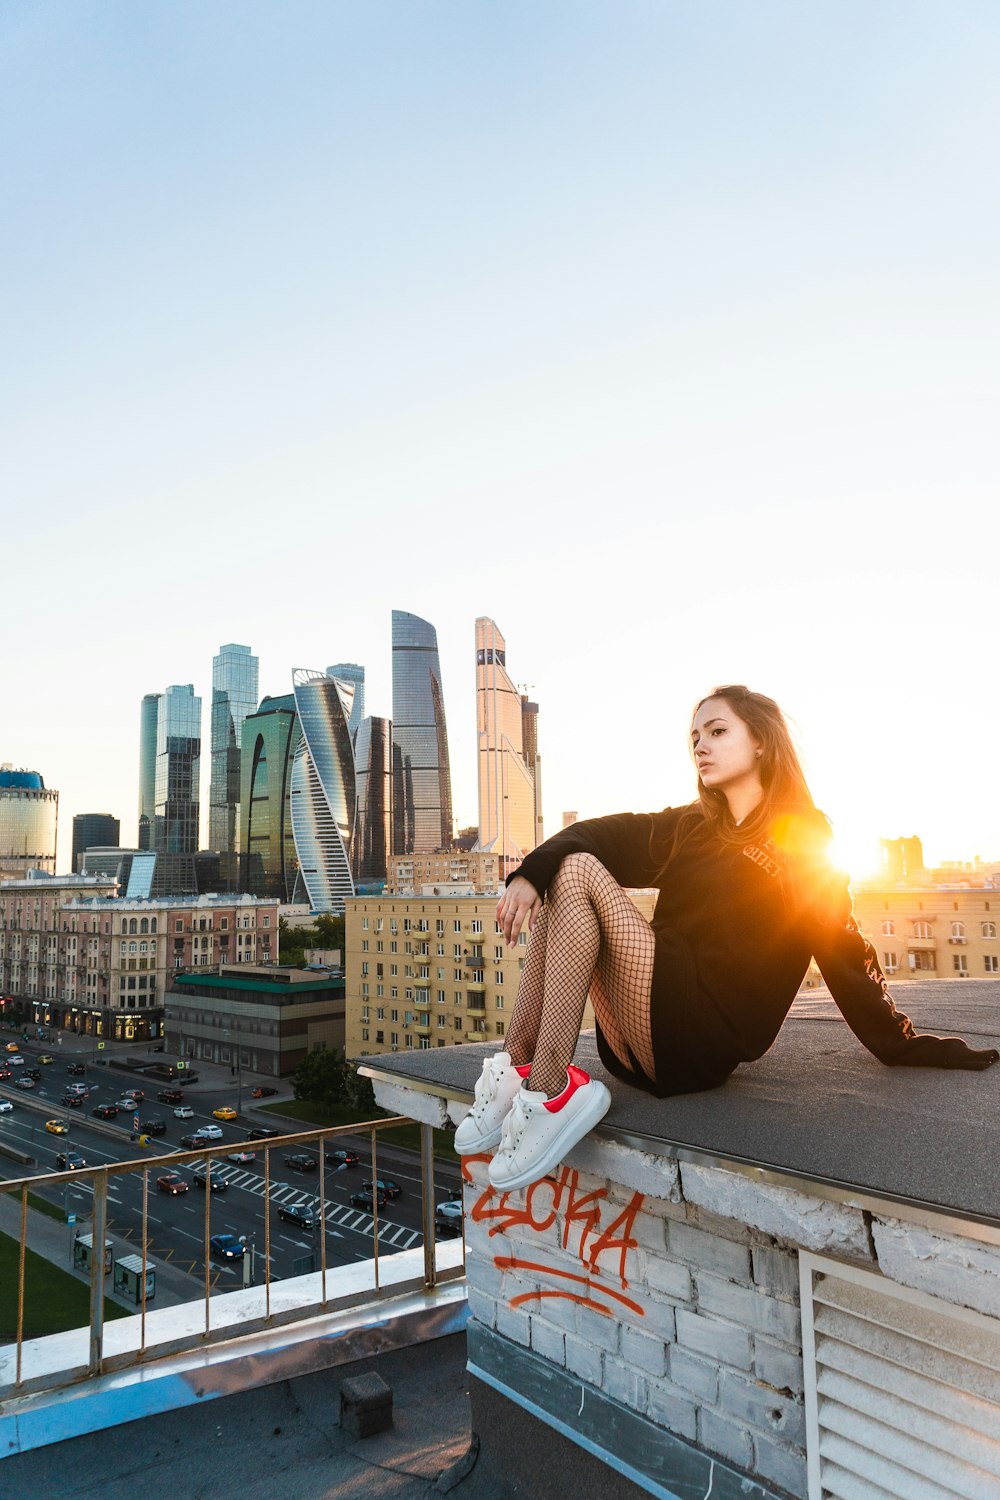 a woman sitting on a ledge with a city skyline in the background